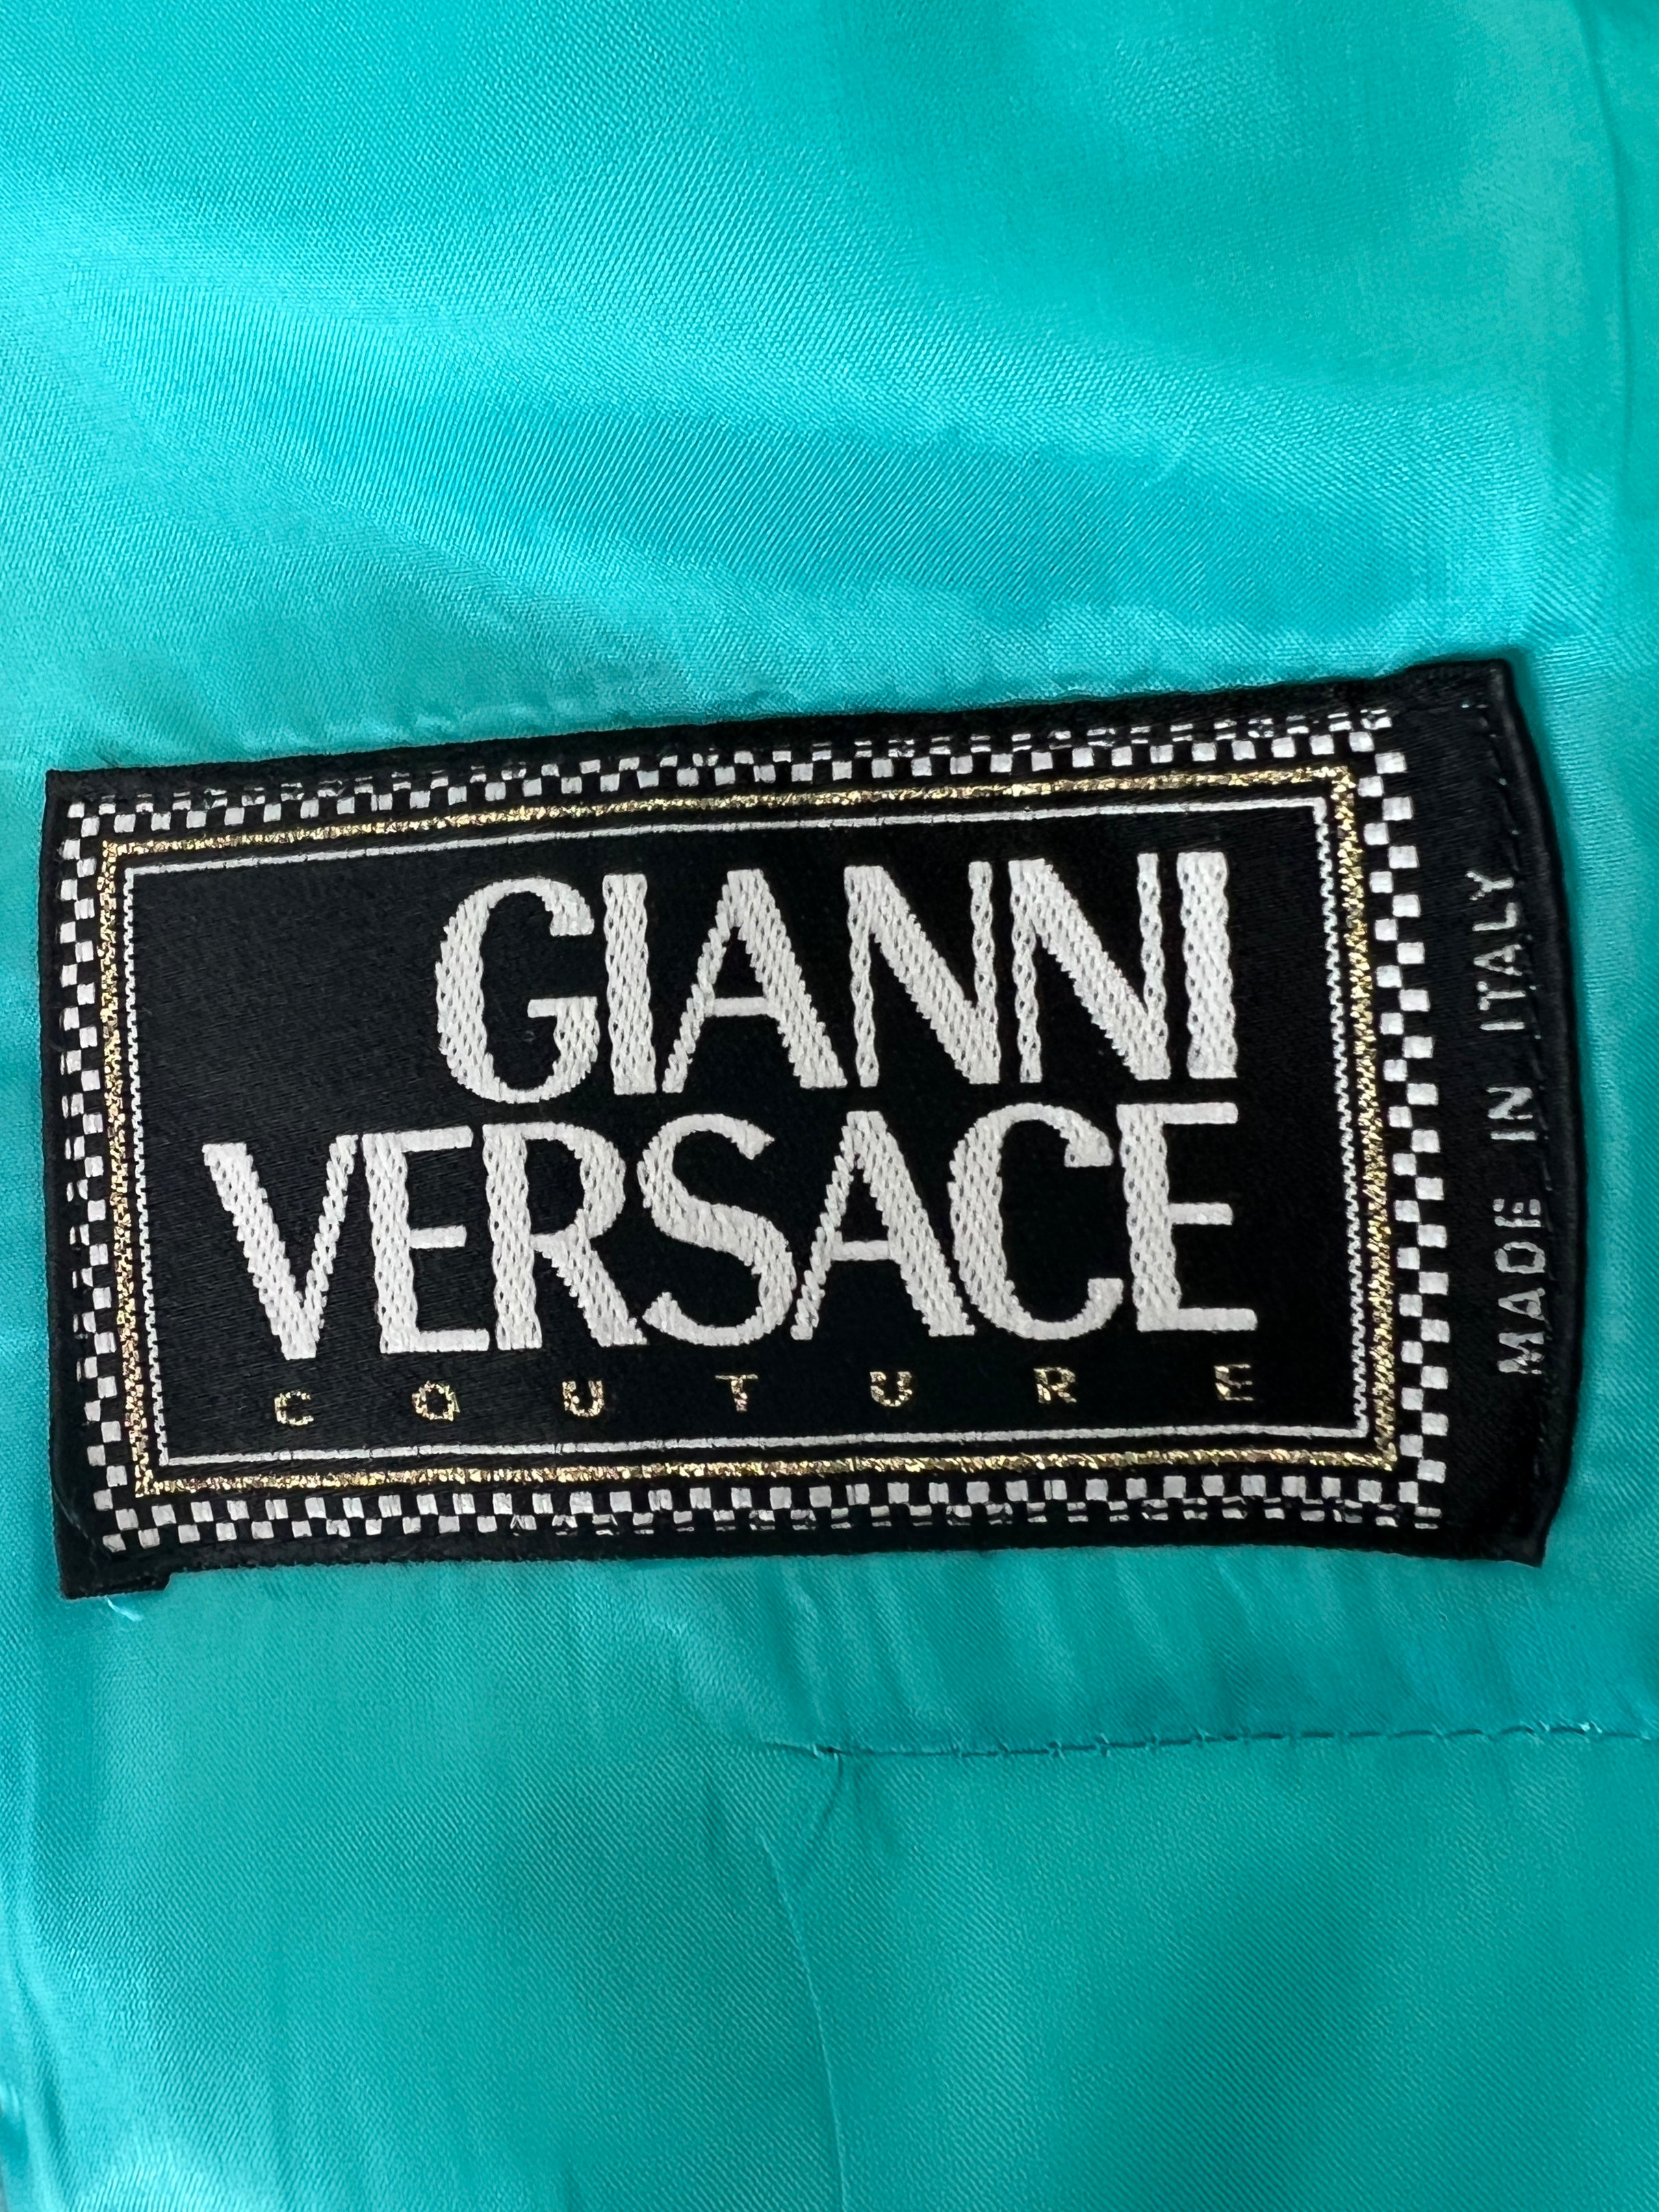 Gianni Versace Fall 1995 Wool Suit